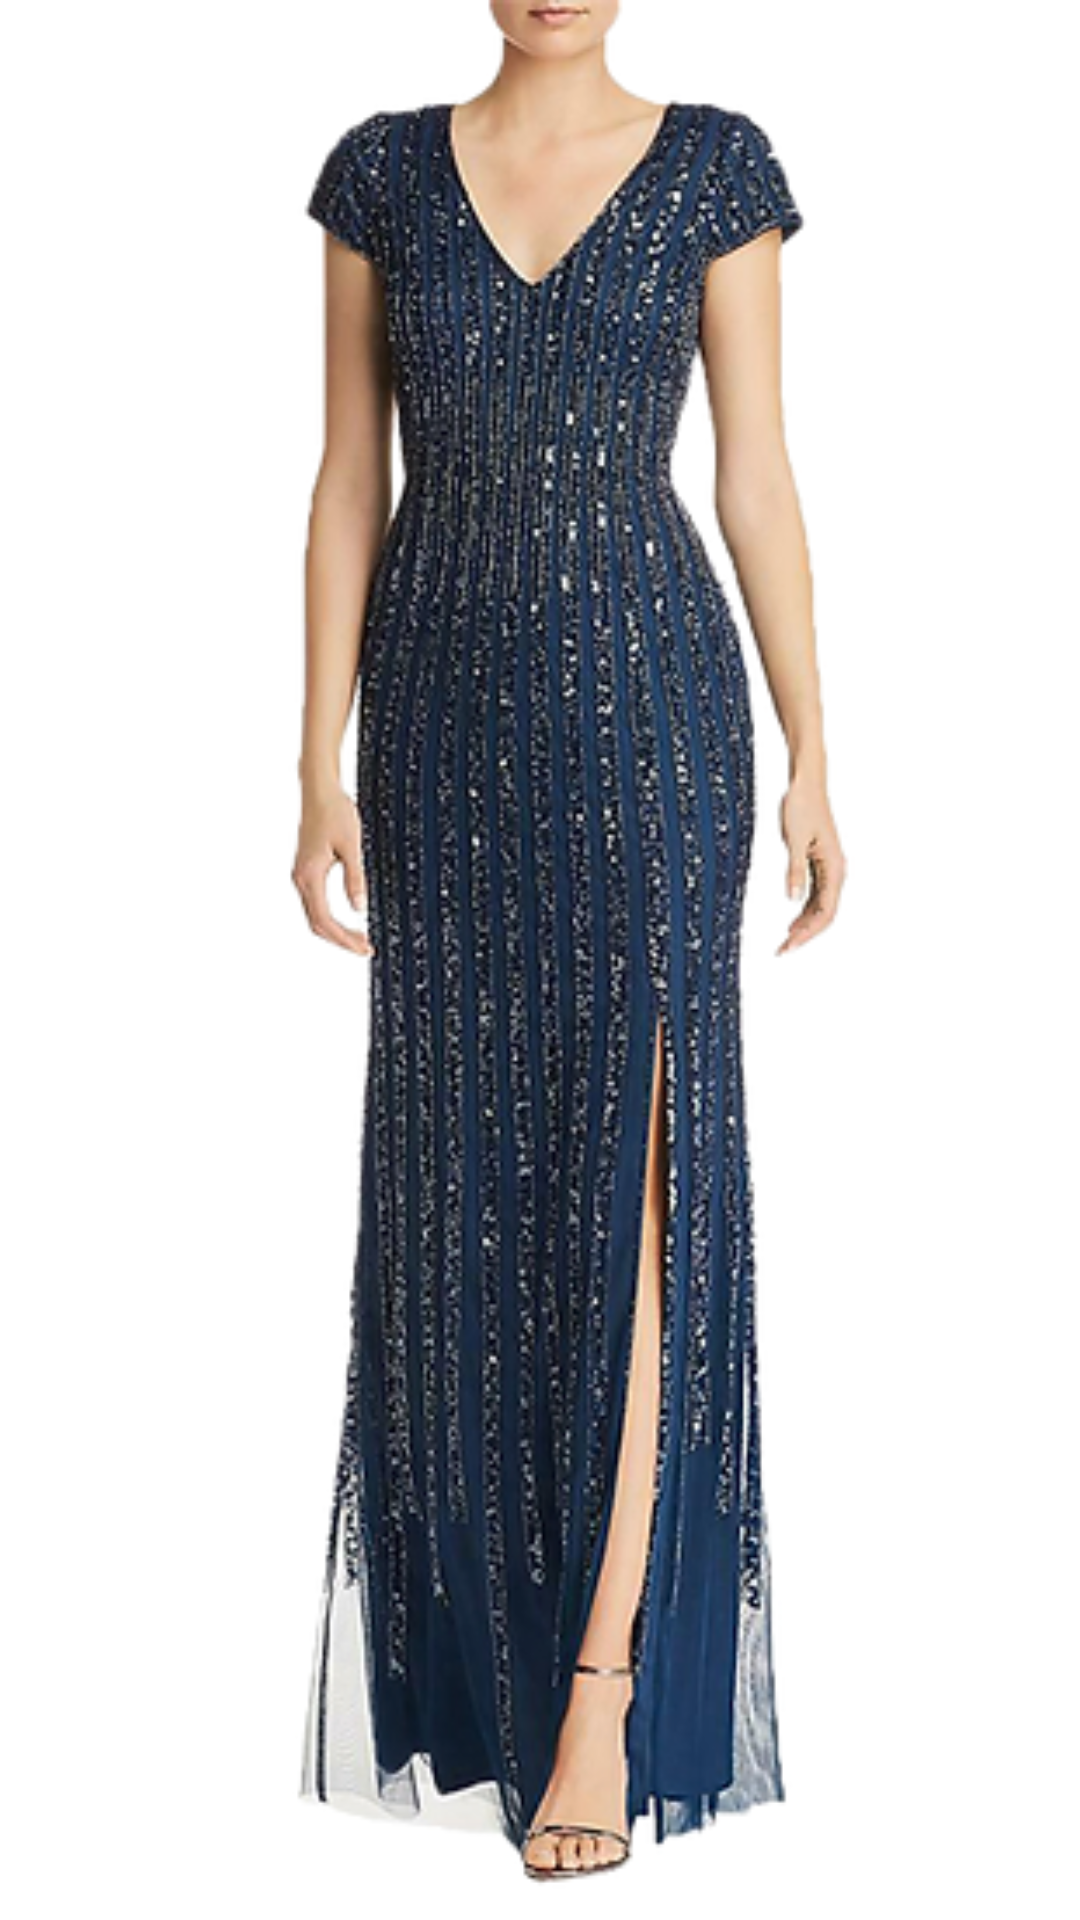 Adrianna Papell Kinsley Beaded Cap Sleeved Gown in Deep Blue